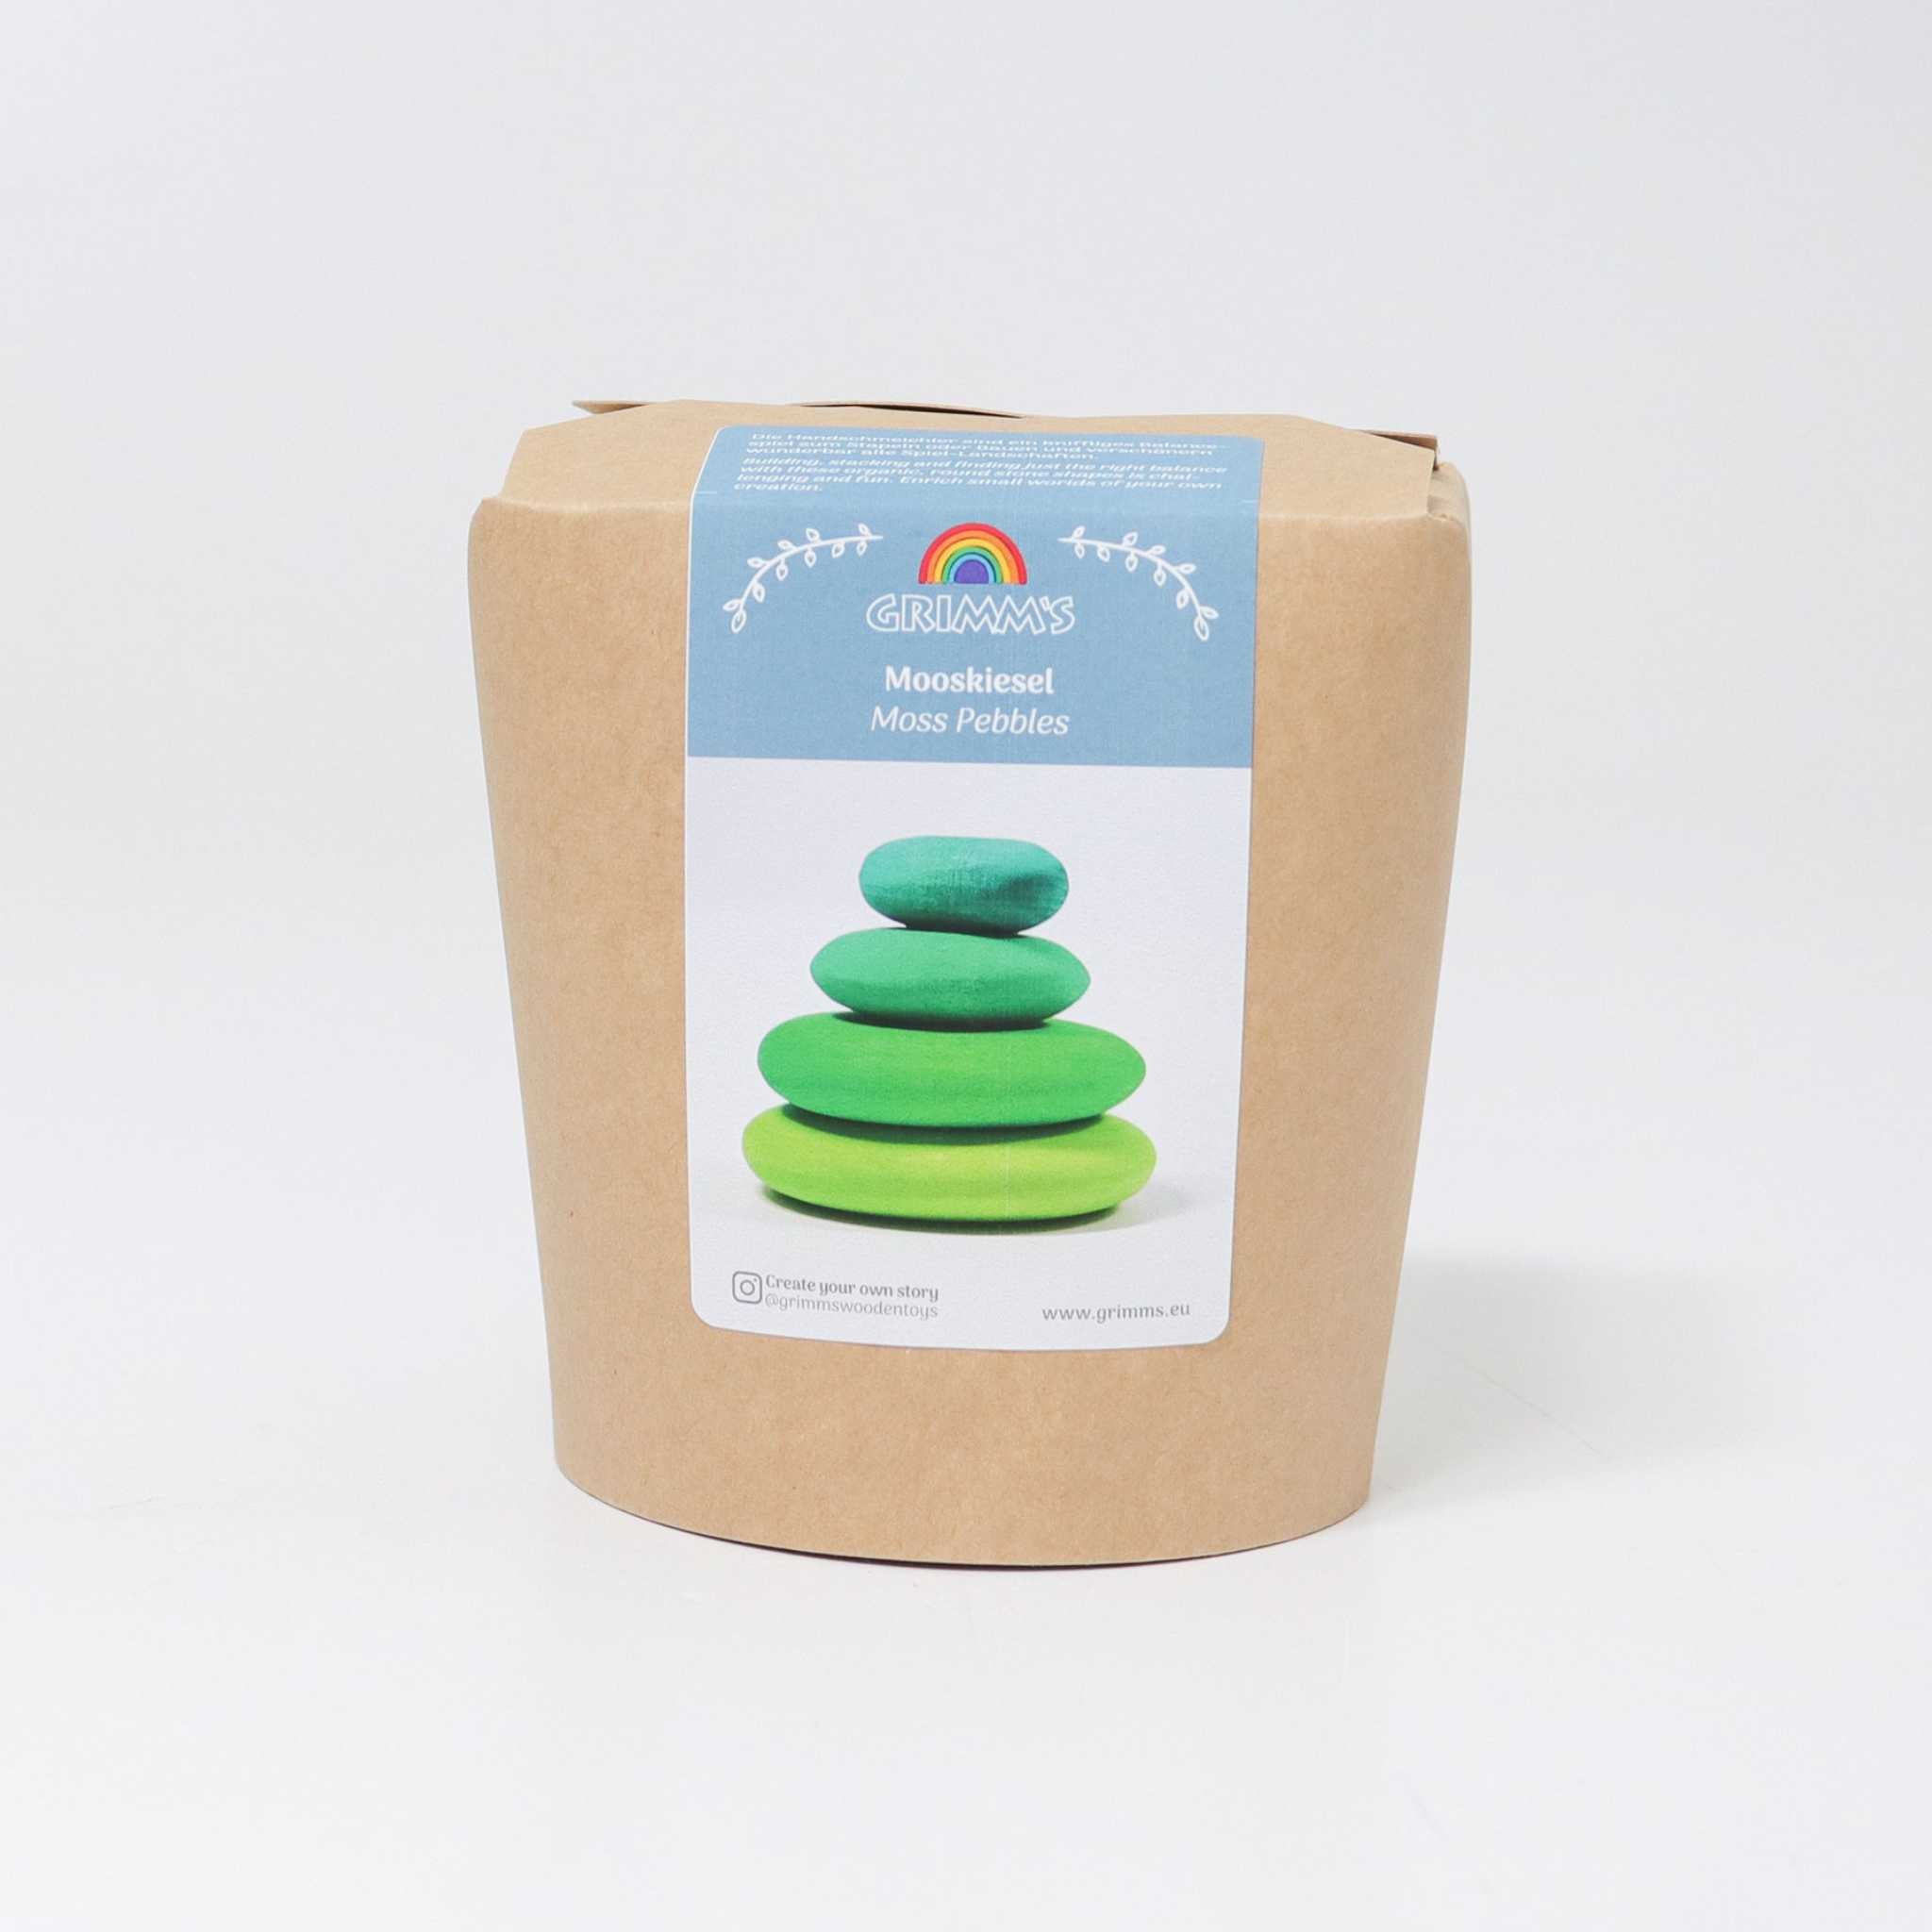 Grimm's Moss Pebbles Packaging